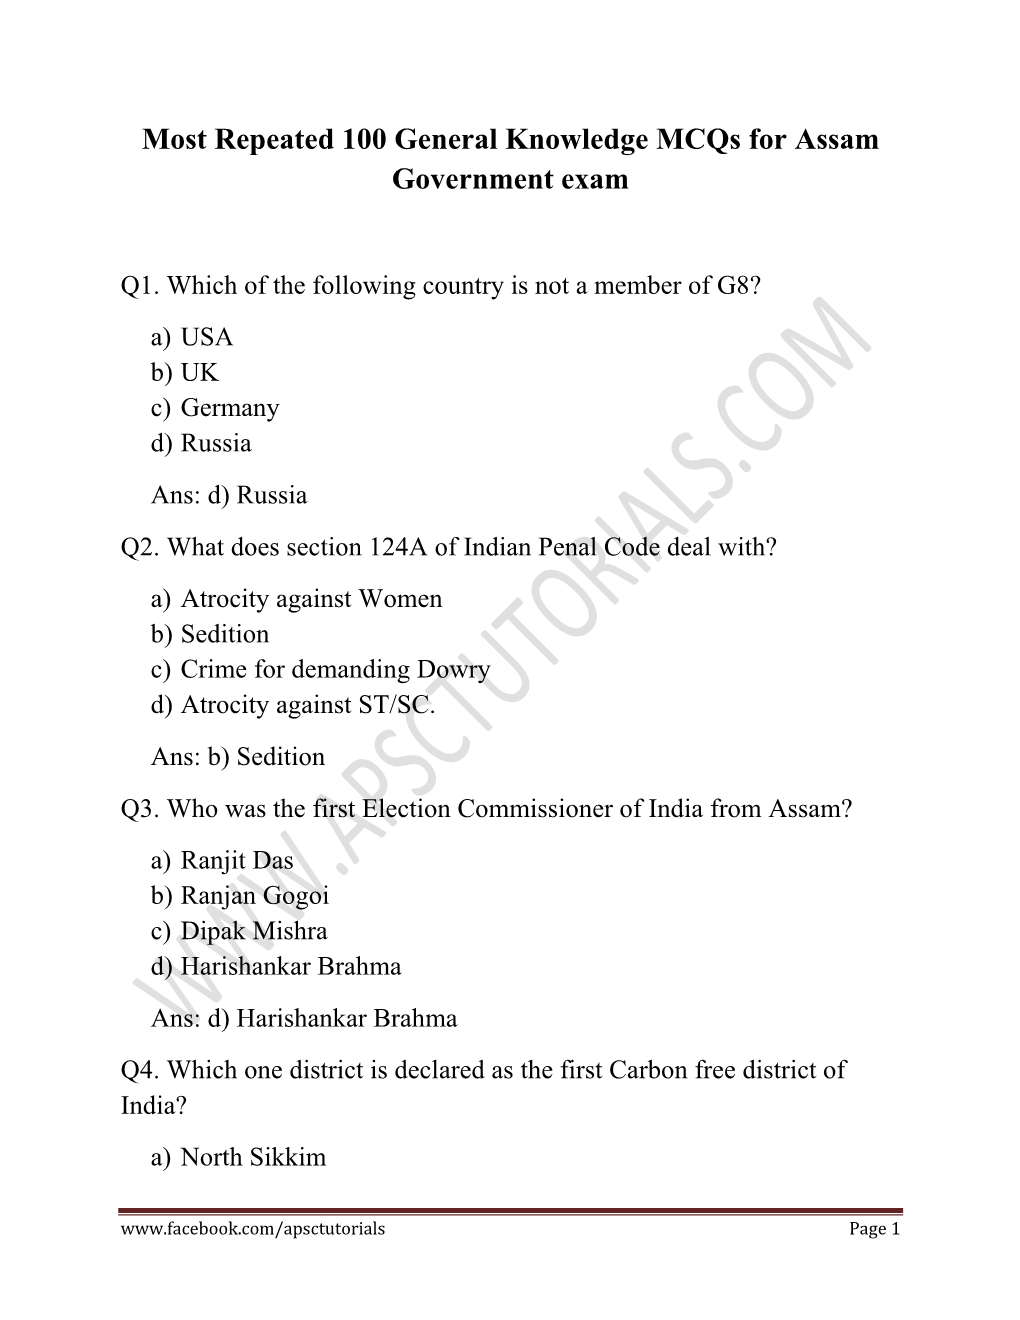 Most Repeated 100 General Knowledge Mcqs for Assam Government Exam